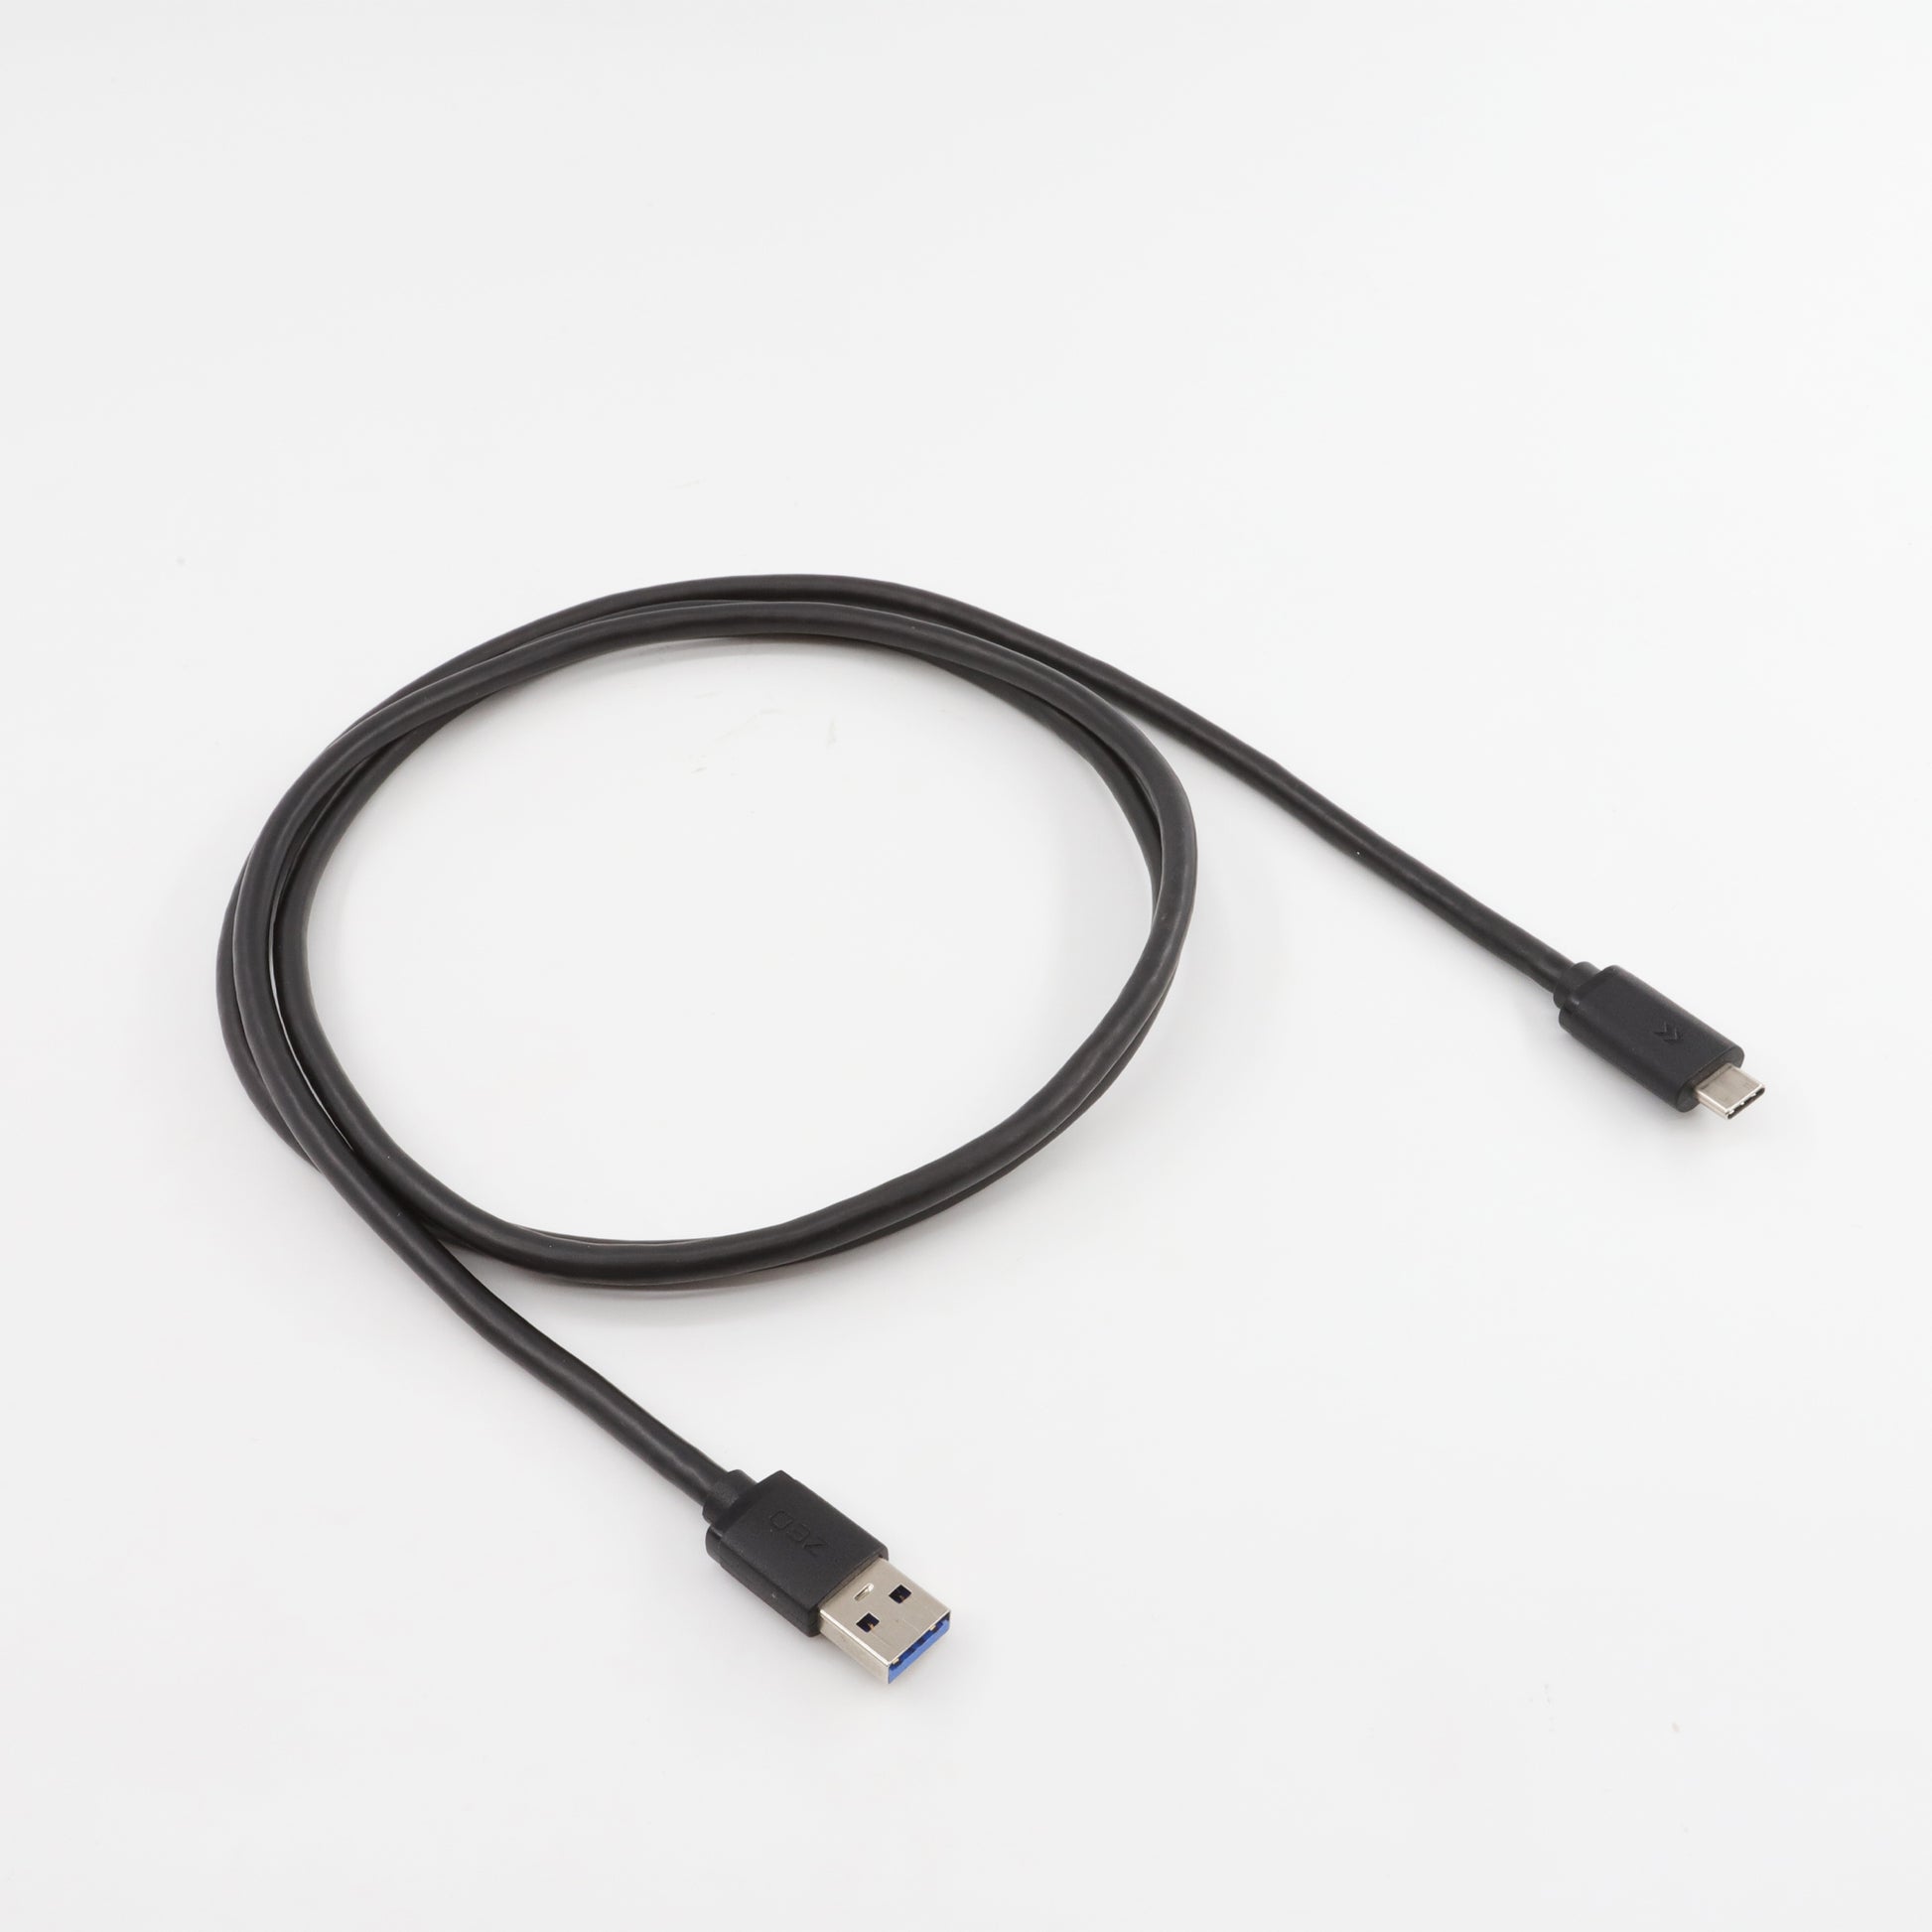 USB 3.0 Type-C Cable for Camera